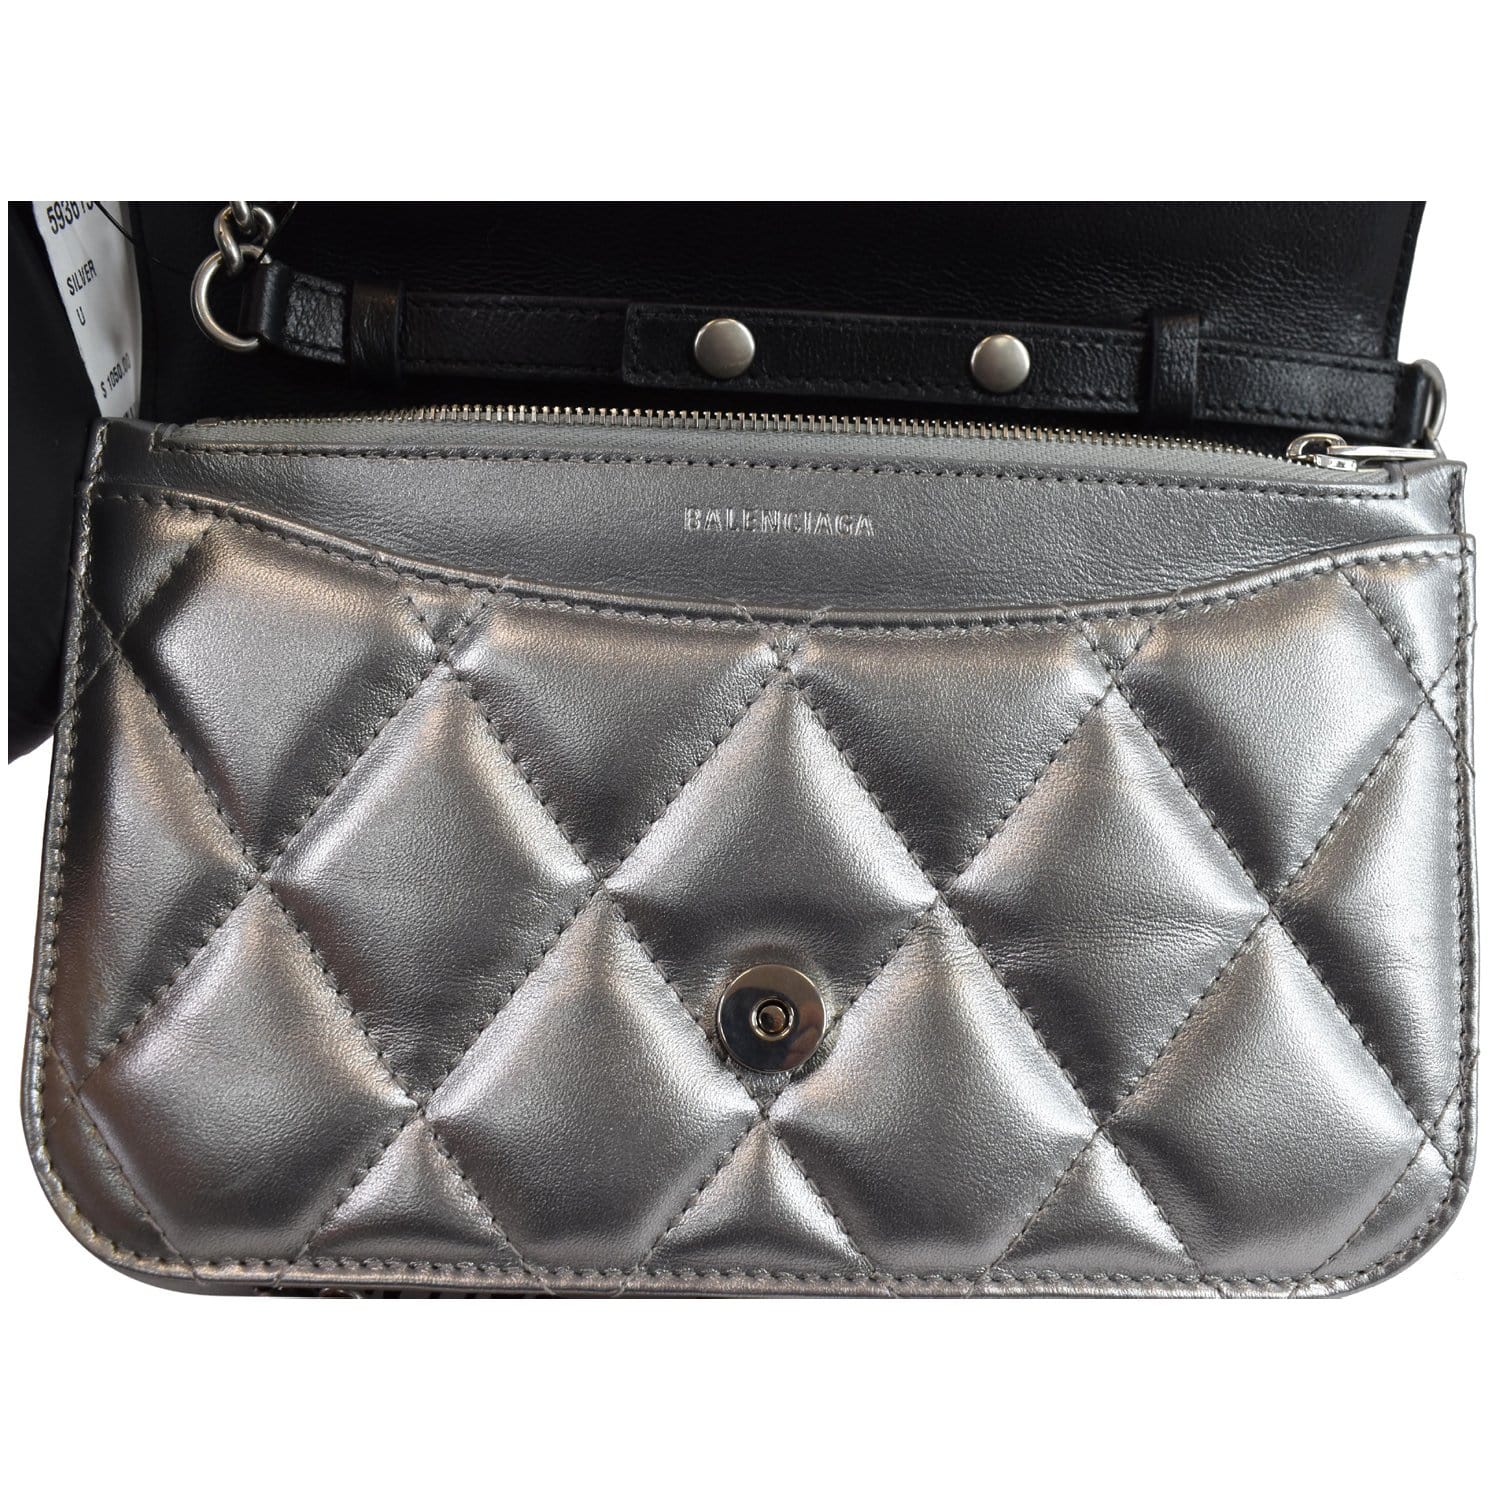 Balenciaga BB Silver Glittered Leather Wallet on Chain Bag